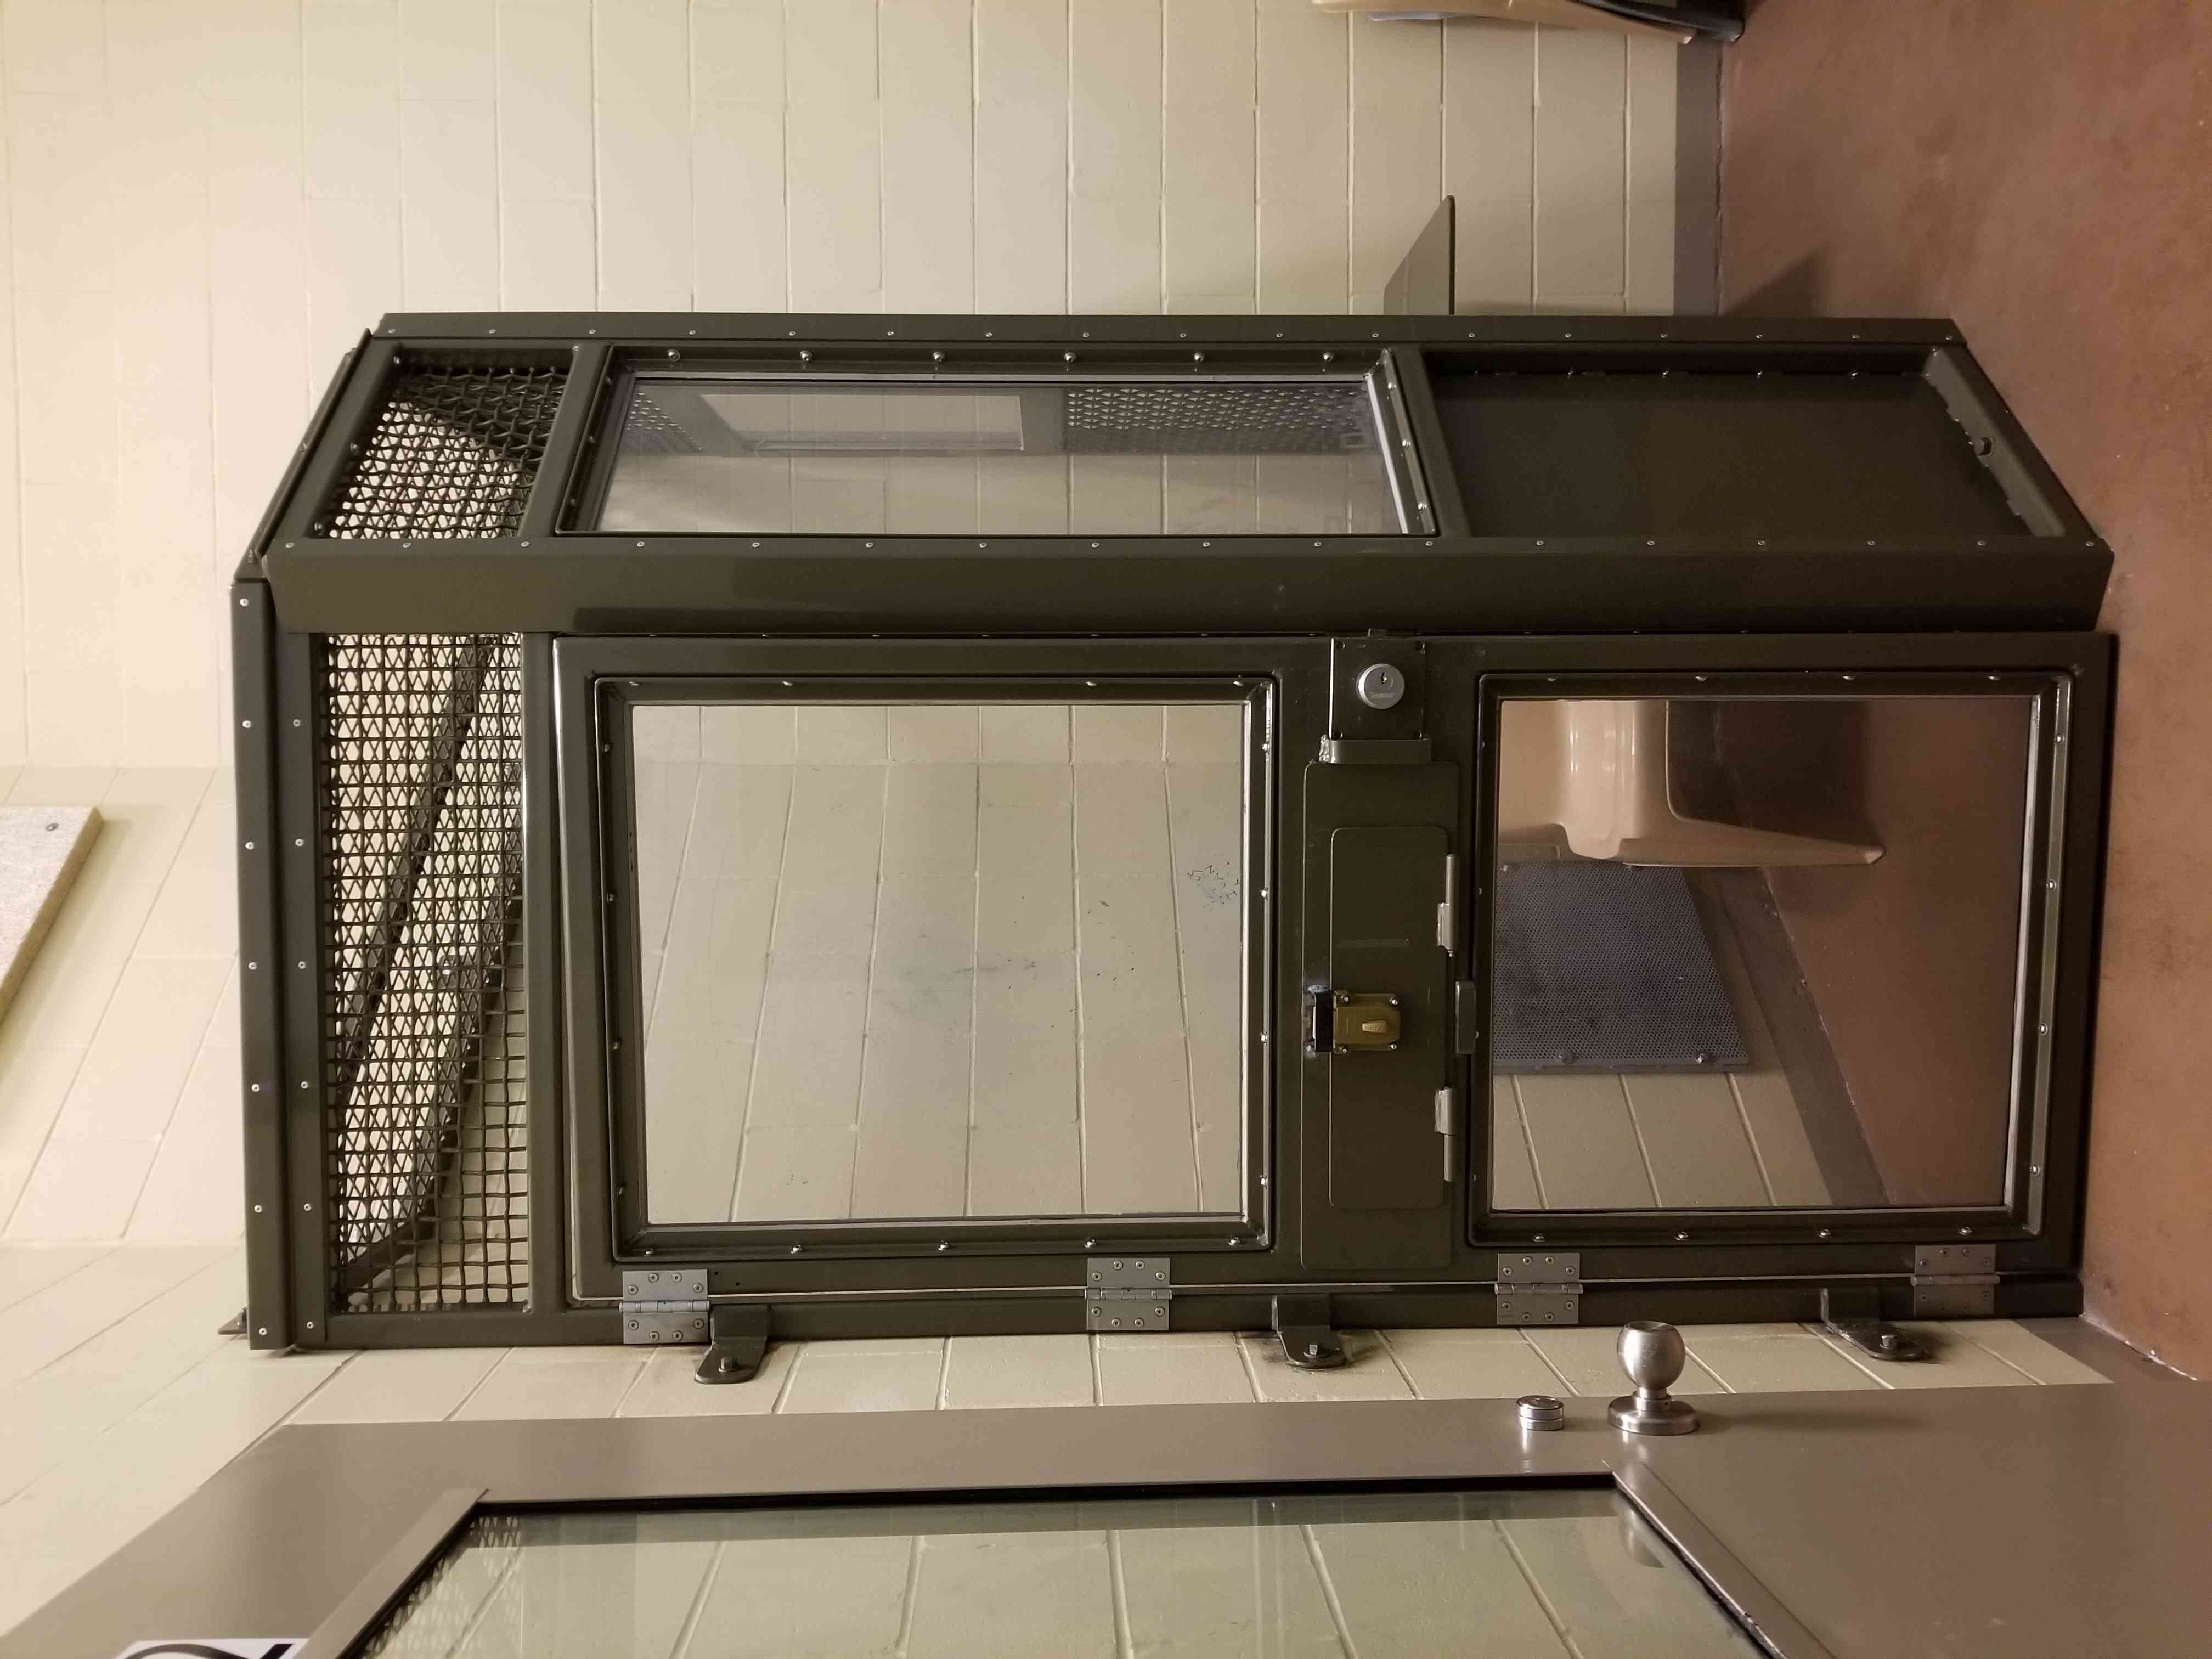 Photo of a non-contact enclosure at Kent Institution.